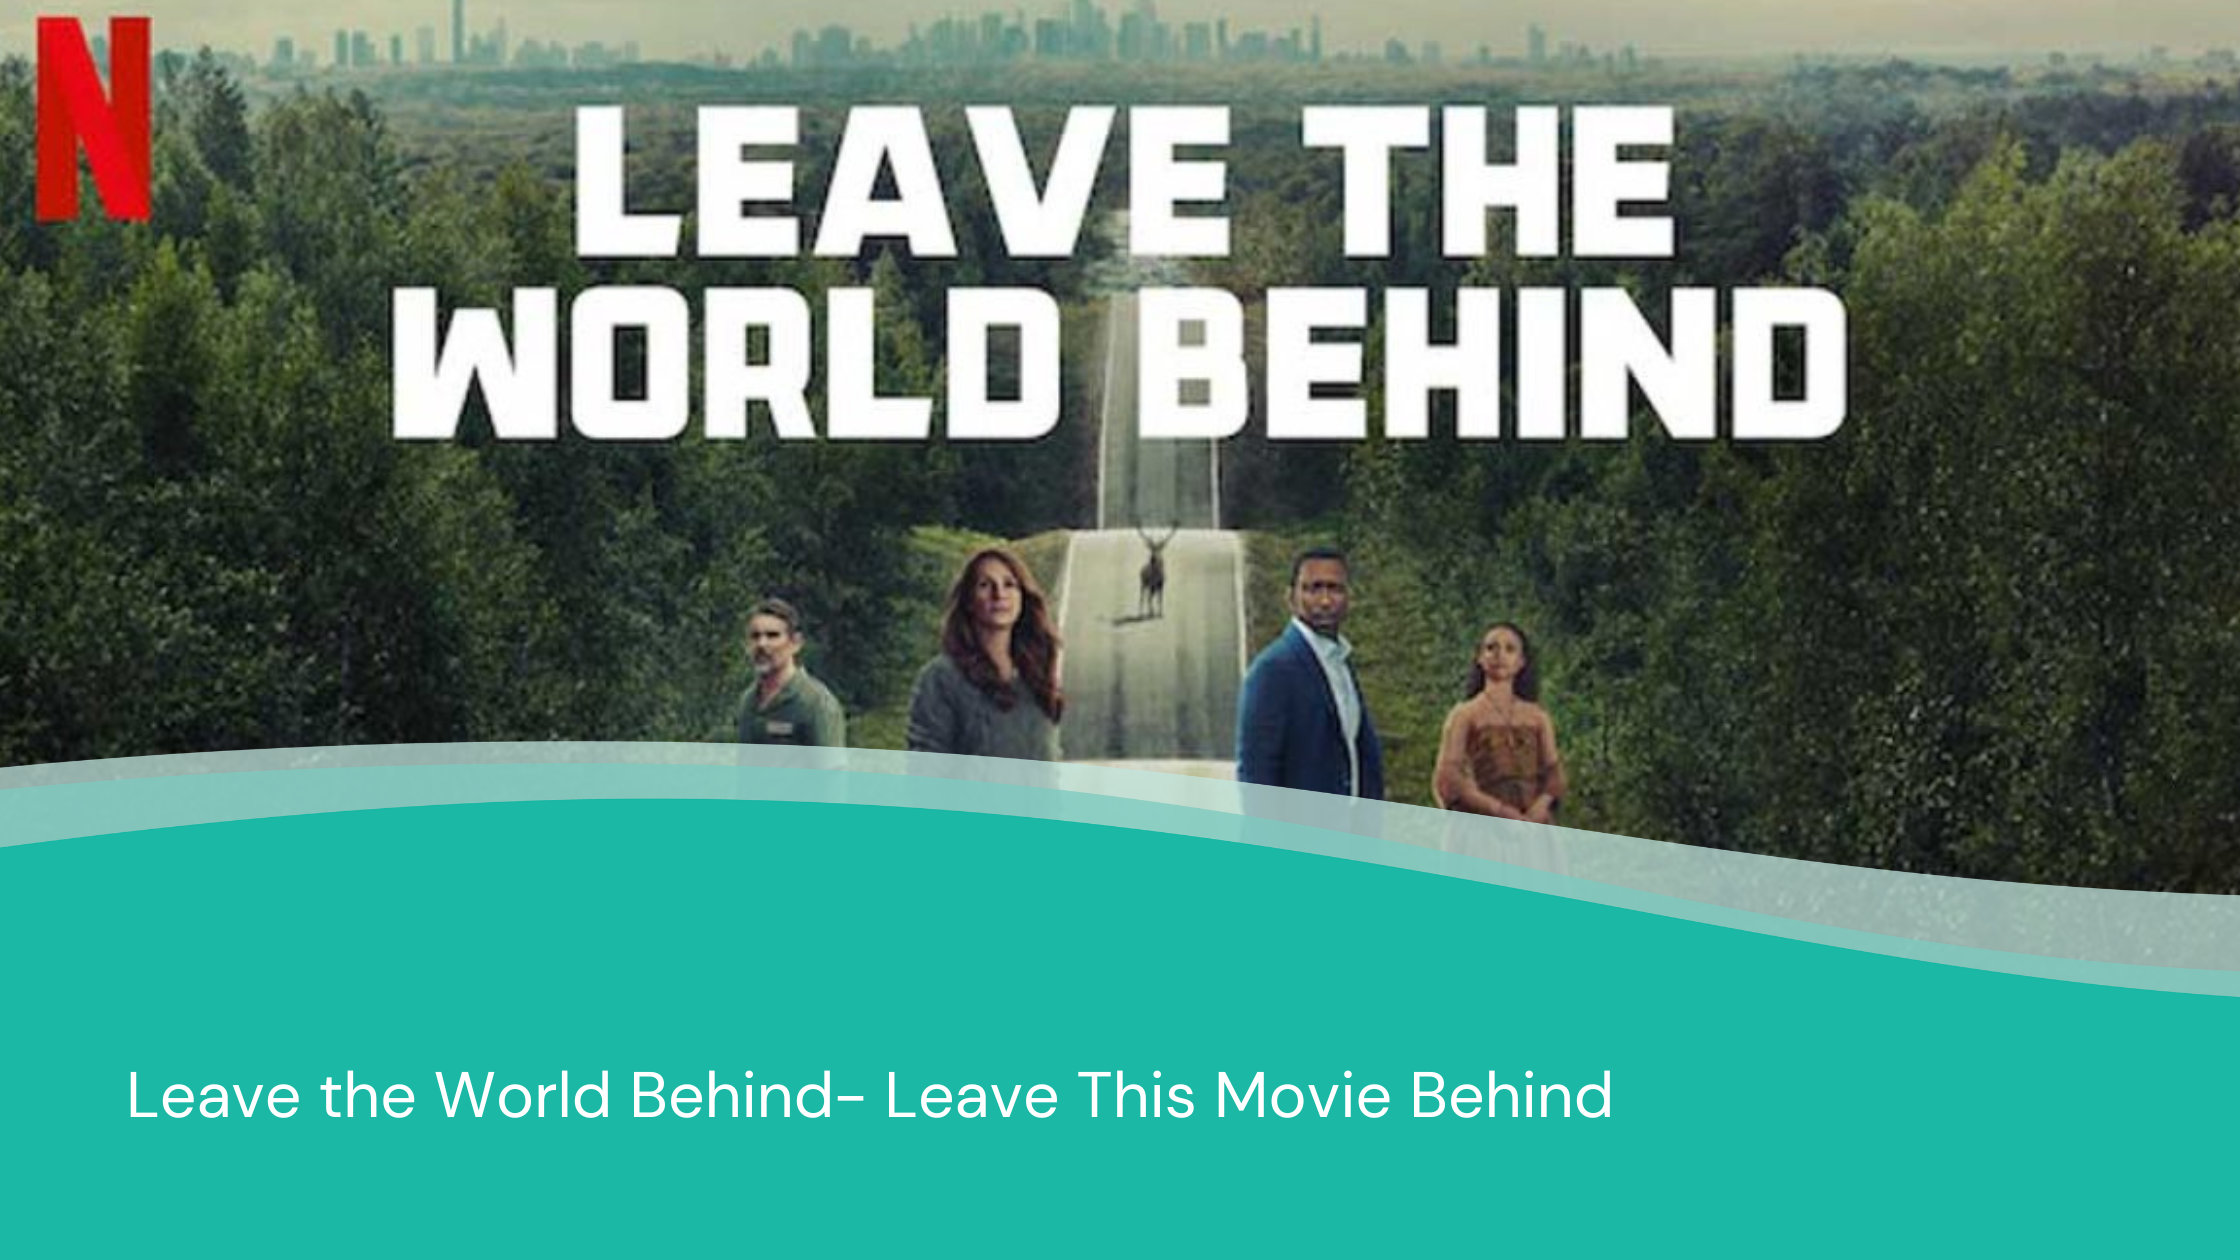 Leave the World Behind- Leave This Movie Behind